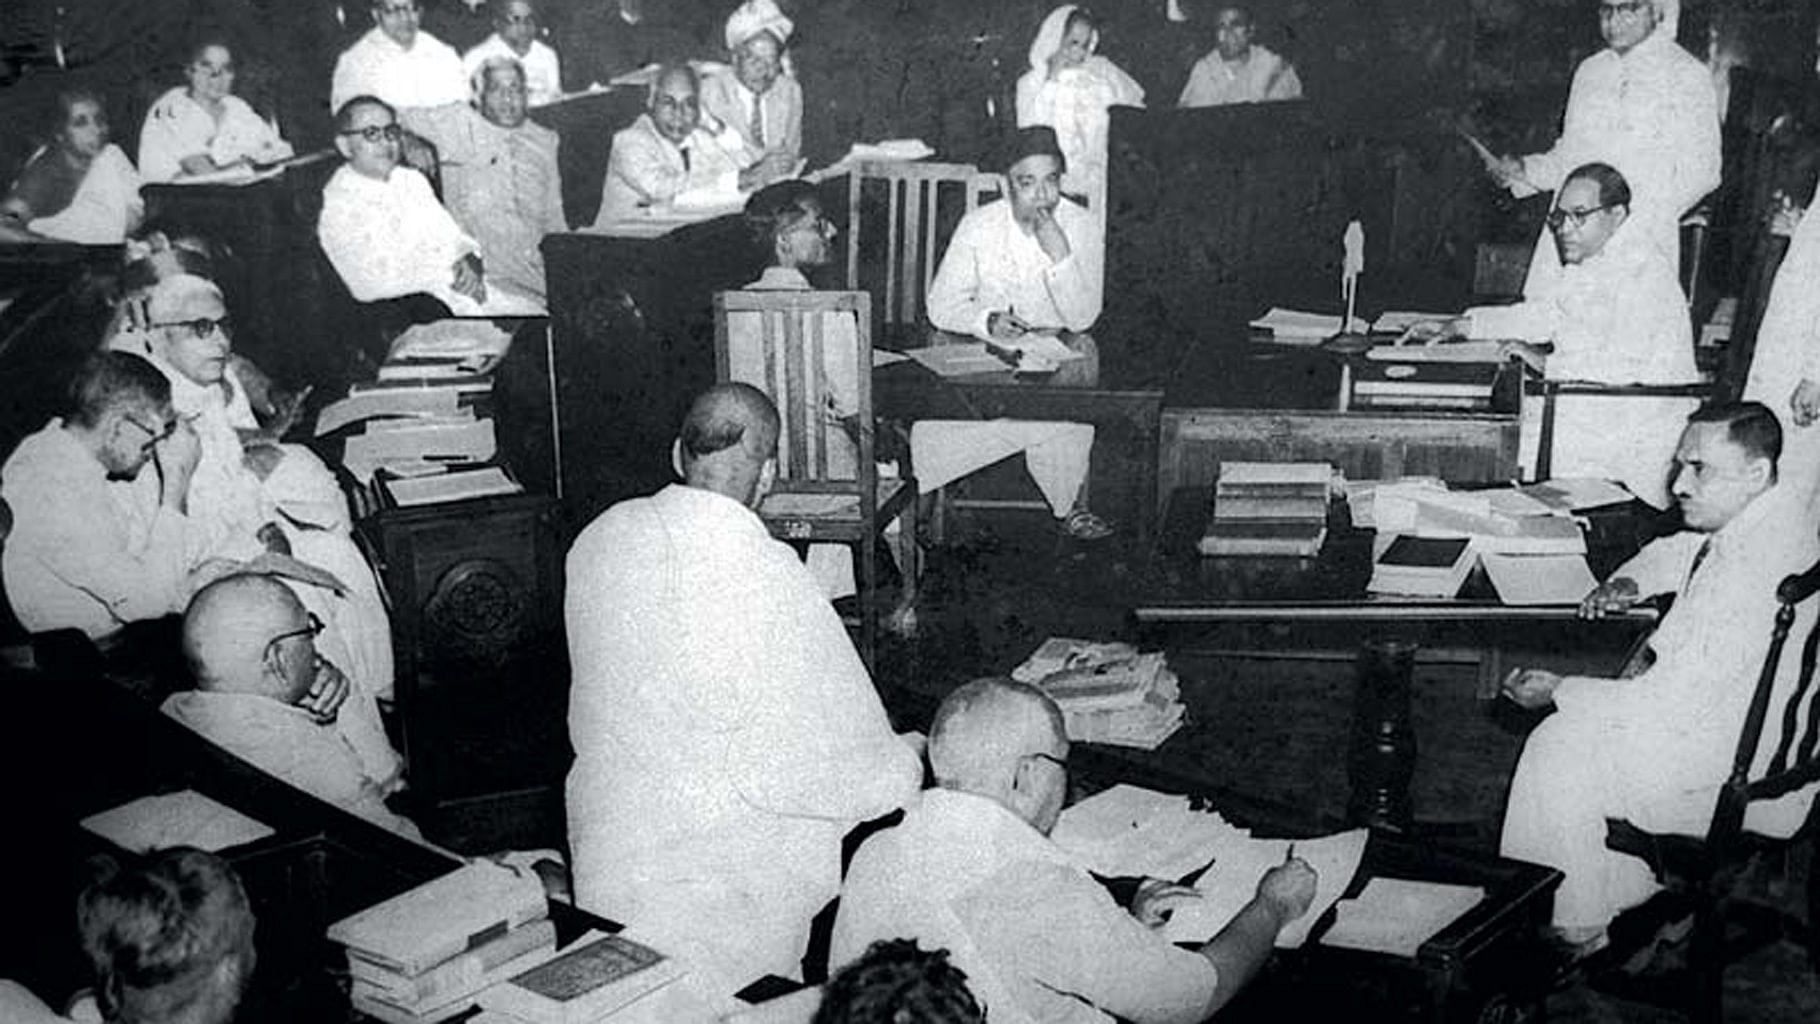 A Constituent Assembly of India meeting in 1950. BR Ambedkar can be seen seated top-right. (Photo: Wikimedia Commons/Public Domain)